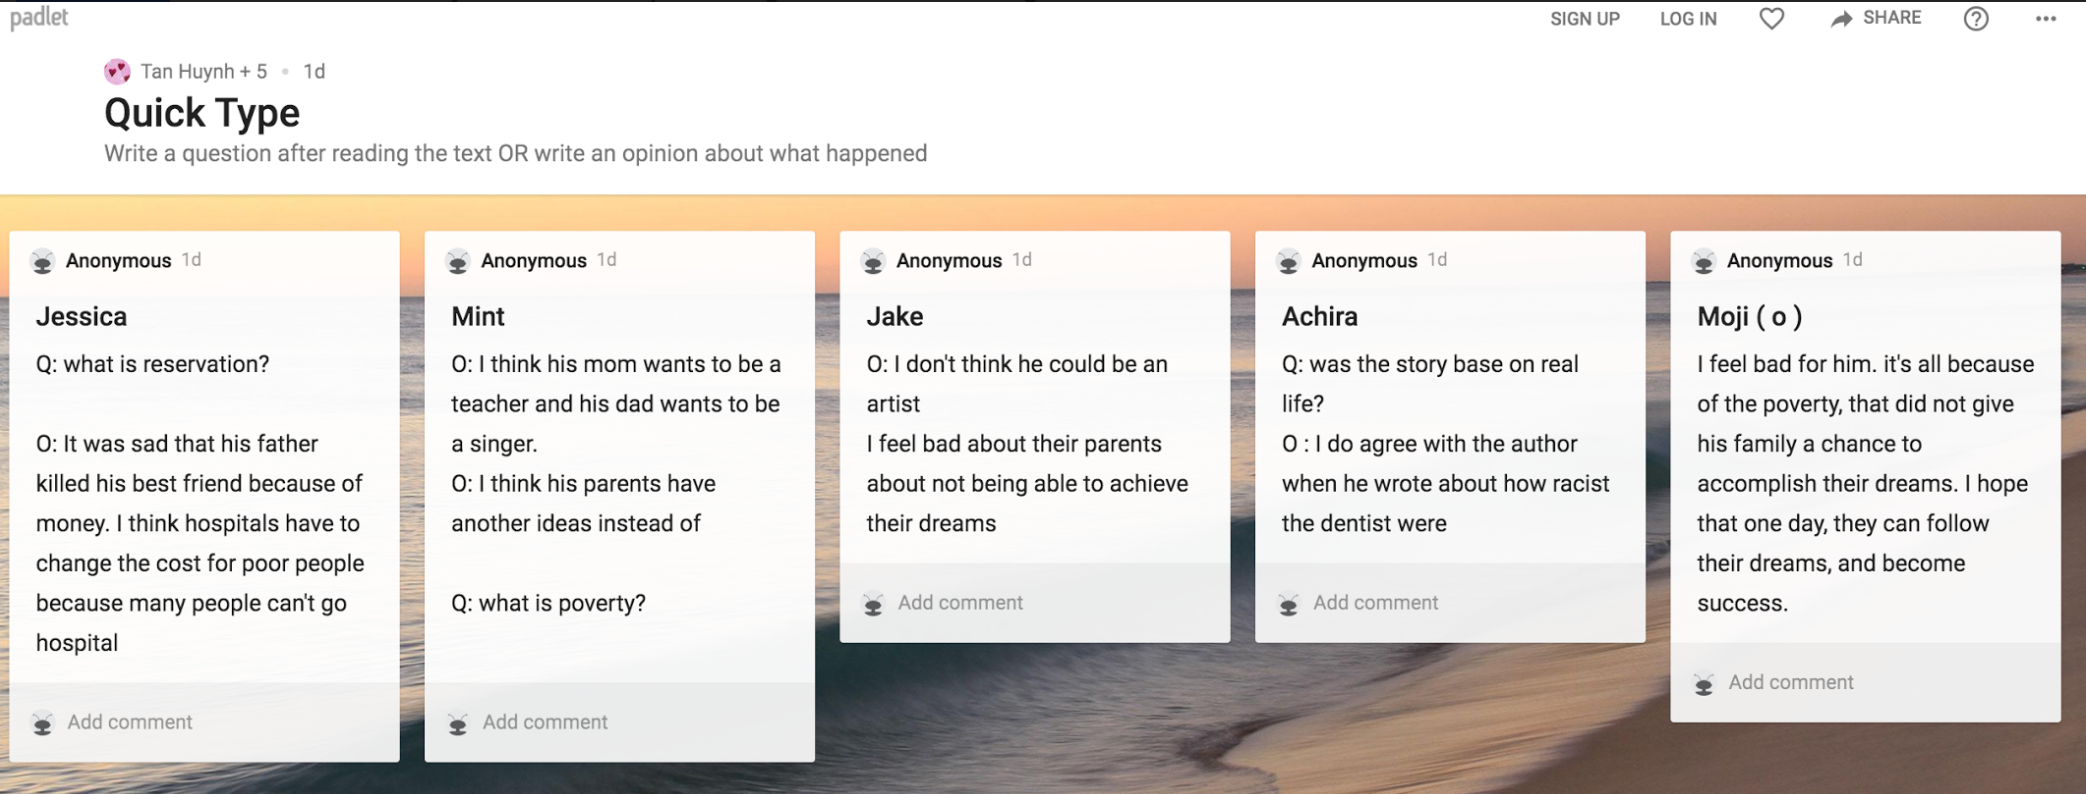 padlet discussion board